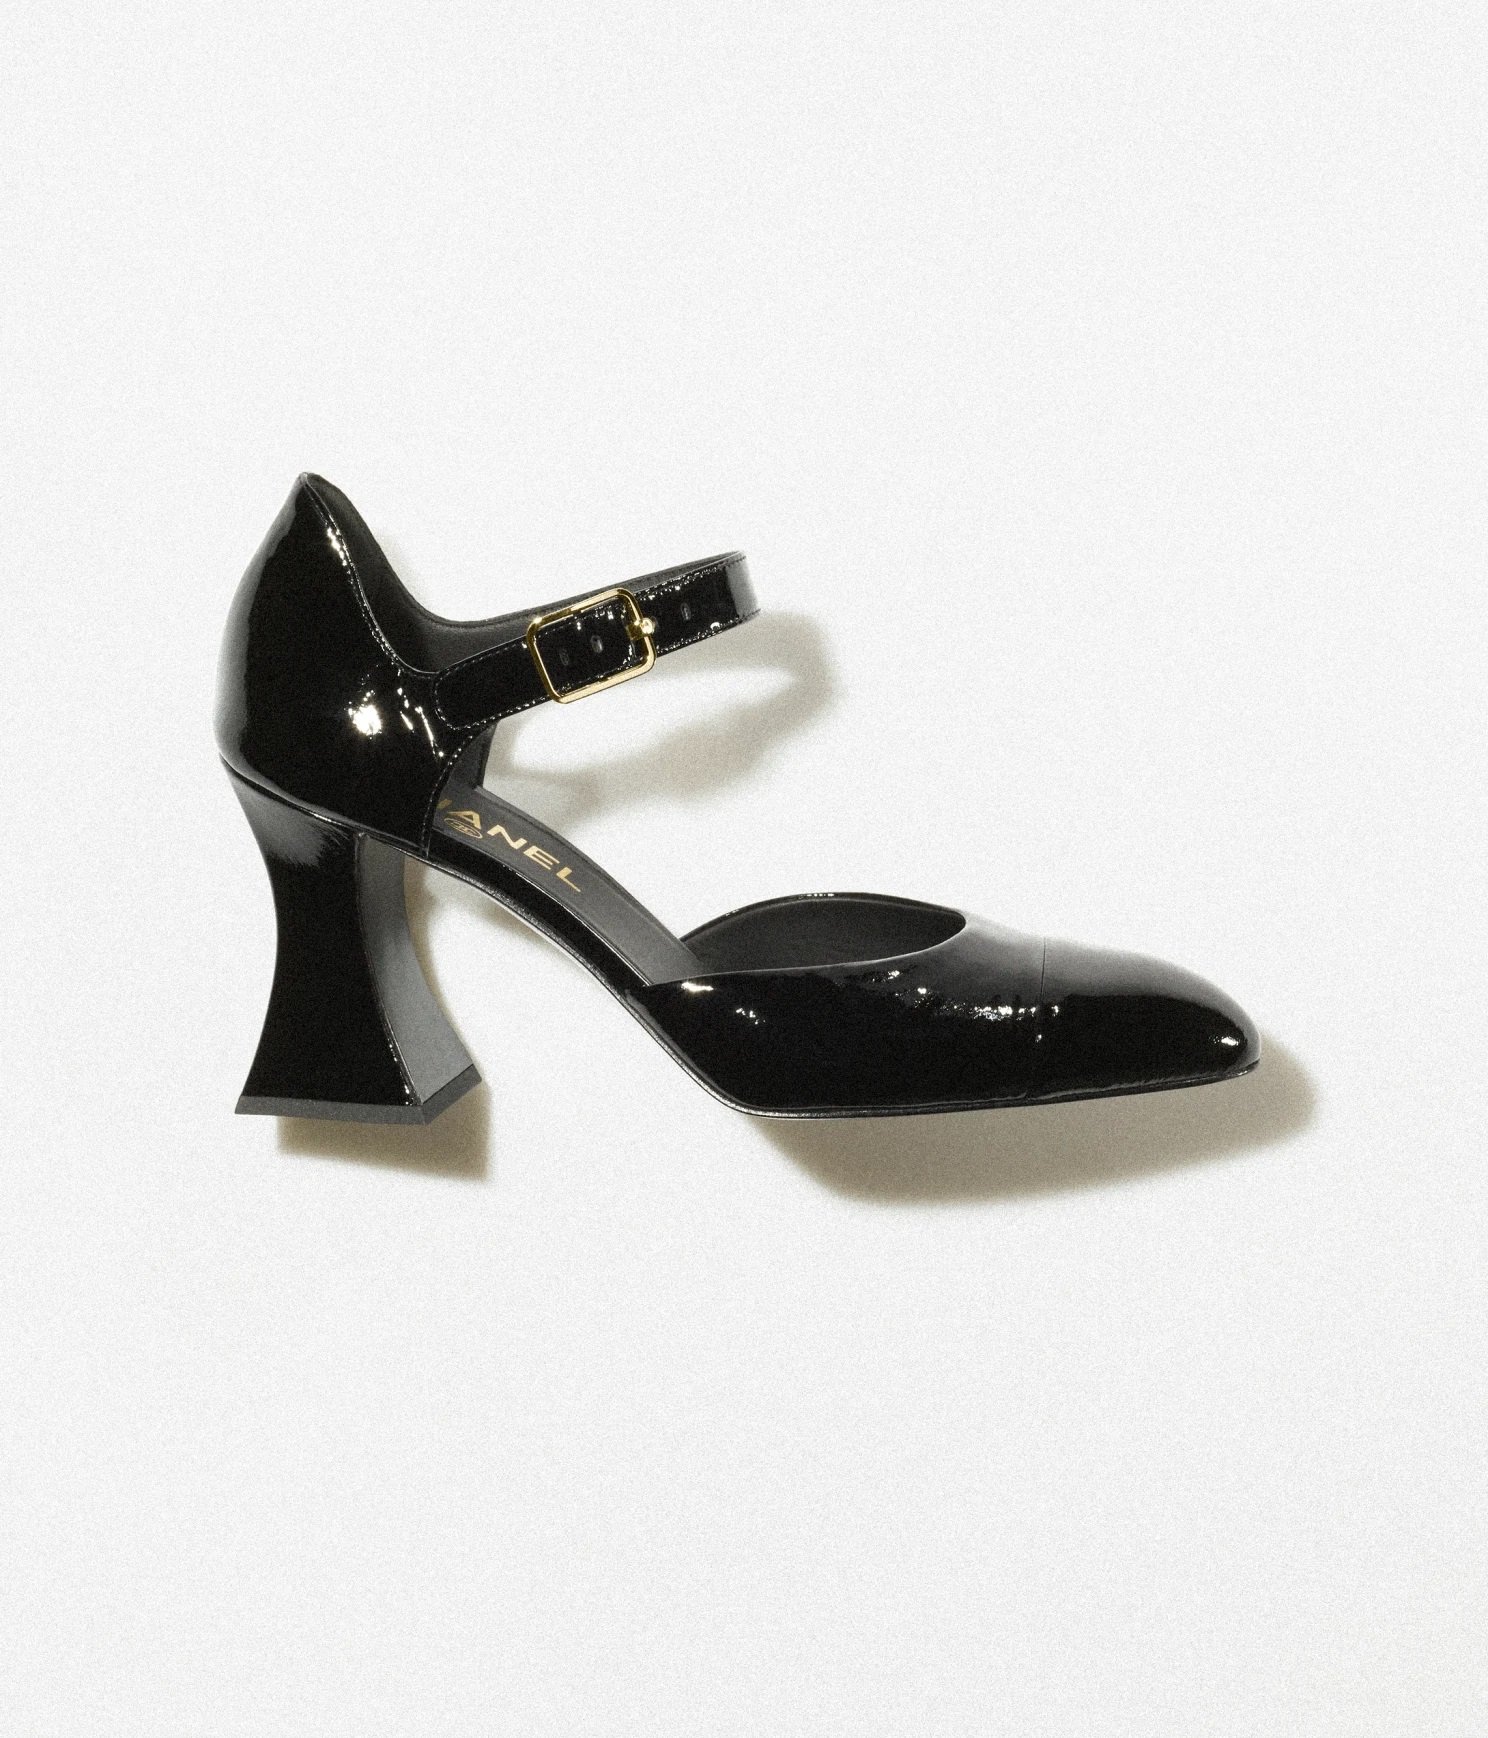 Chanel Mary-Jane Open Pumps in Black Patent Leather.jpg